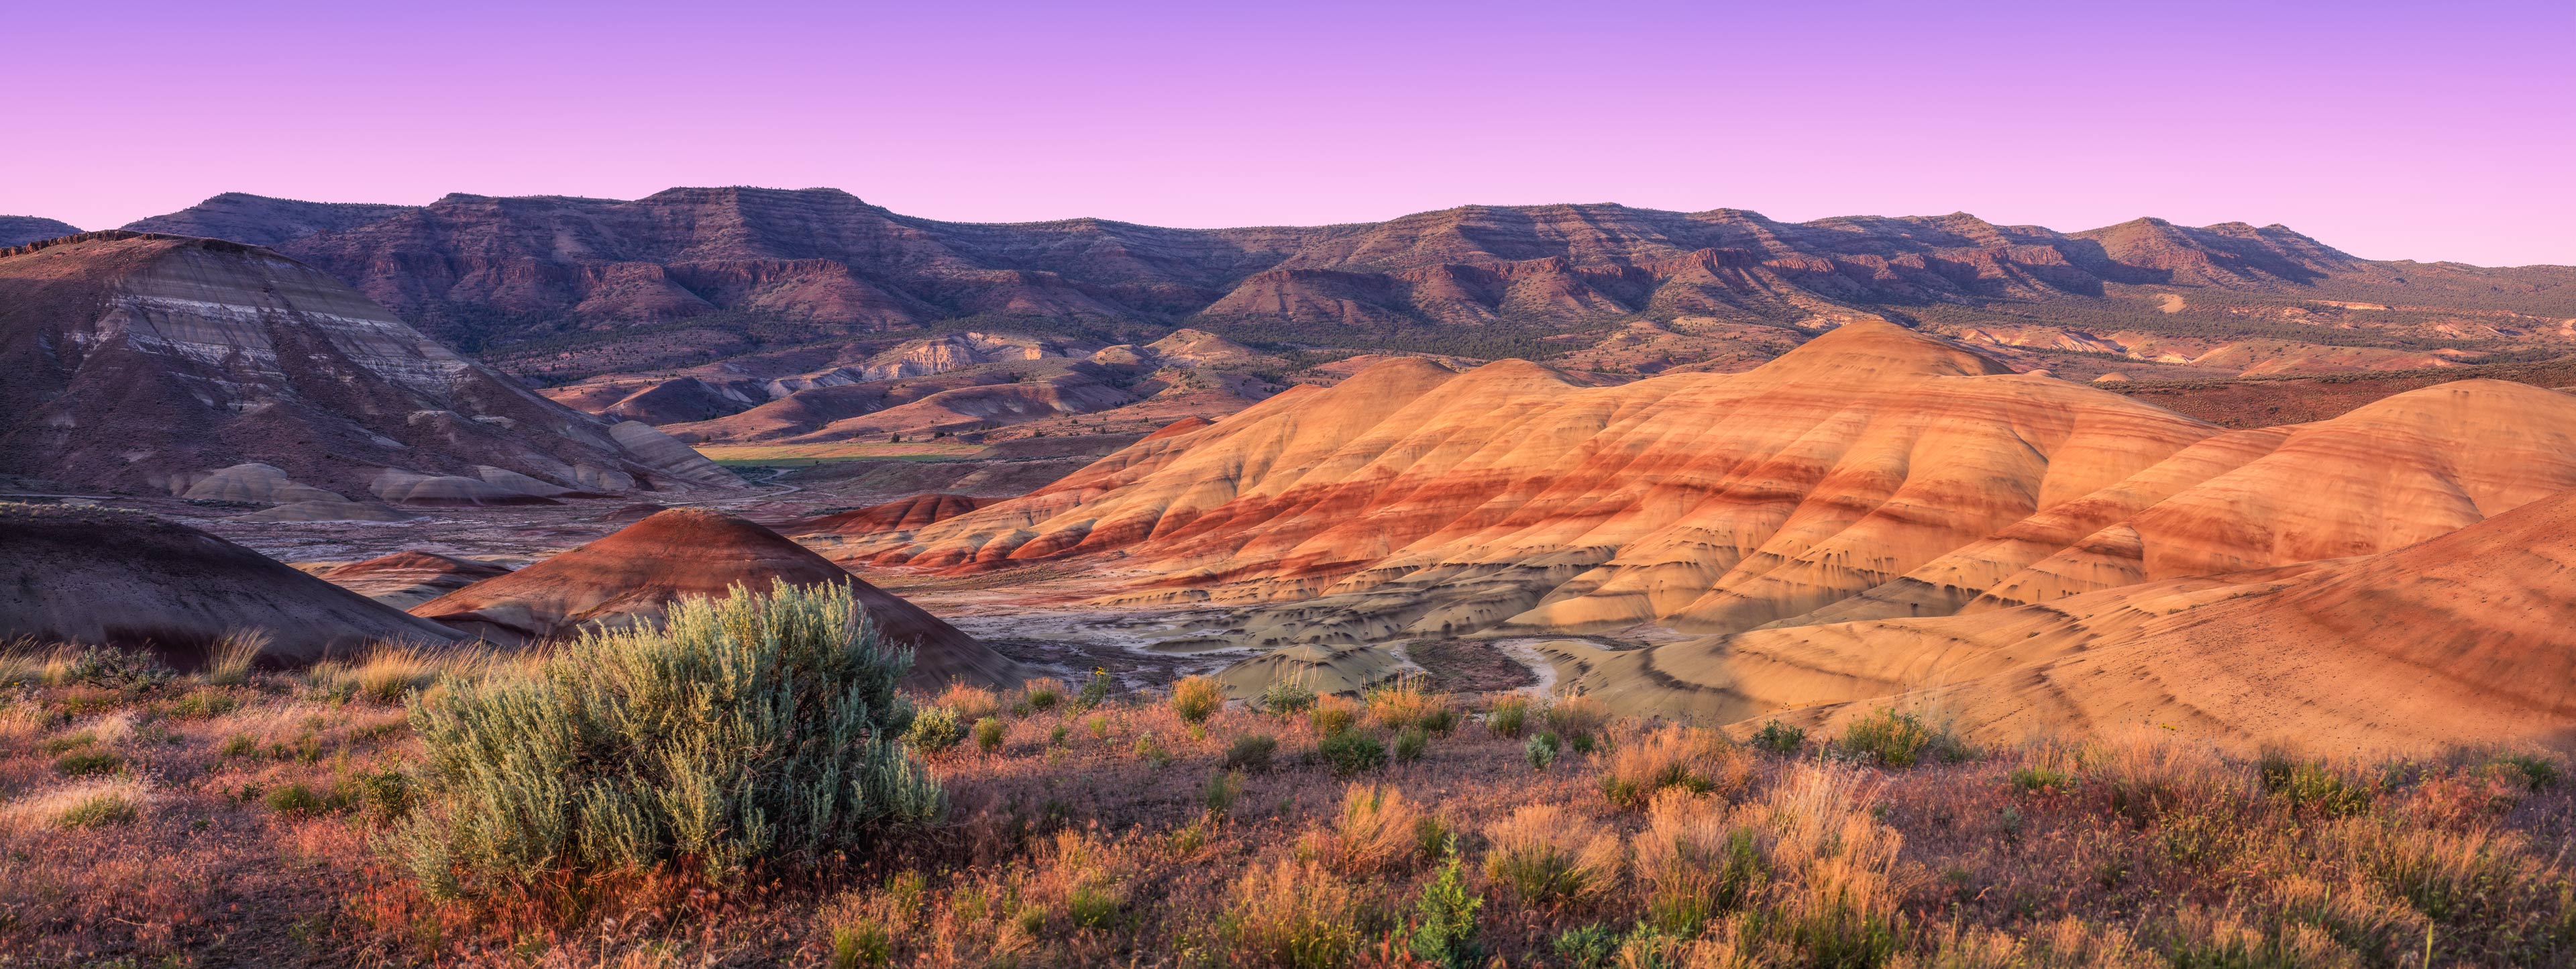 John Day Fossil Beds National Monument, Painted Hills Unit, Oregon USA (40497.jday1)